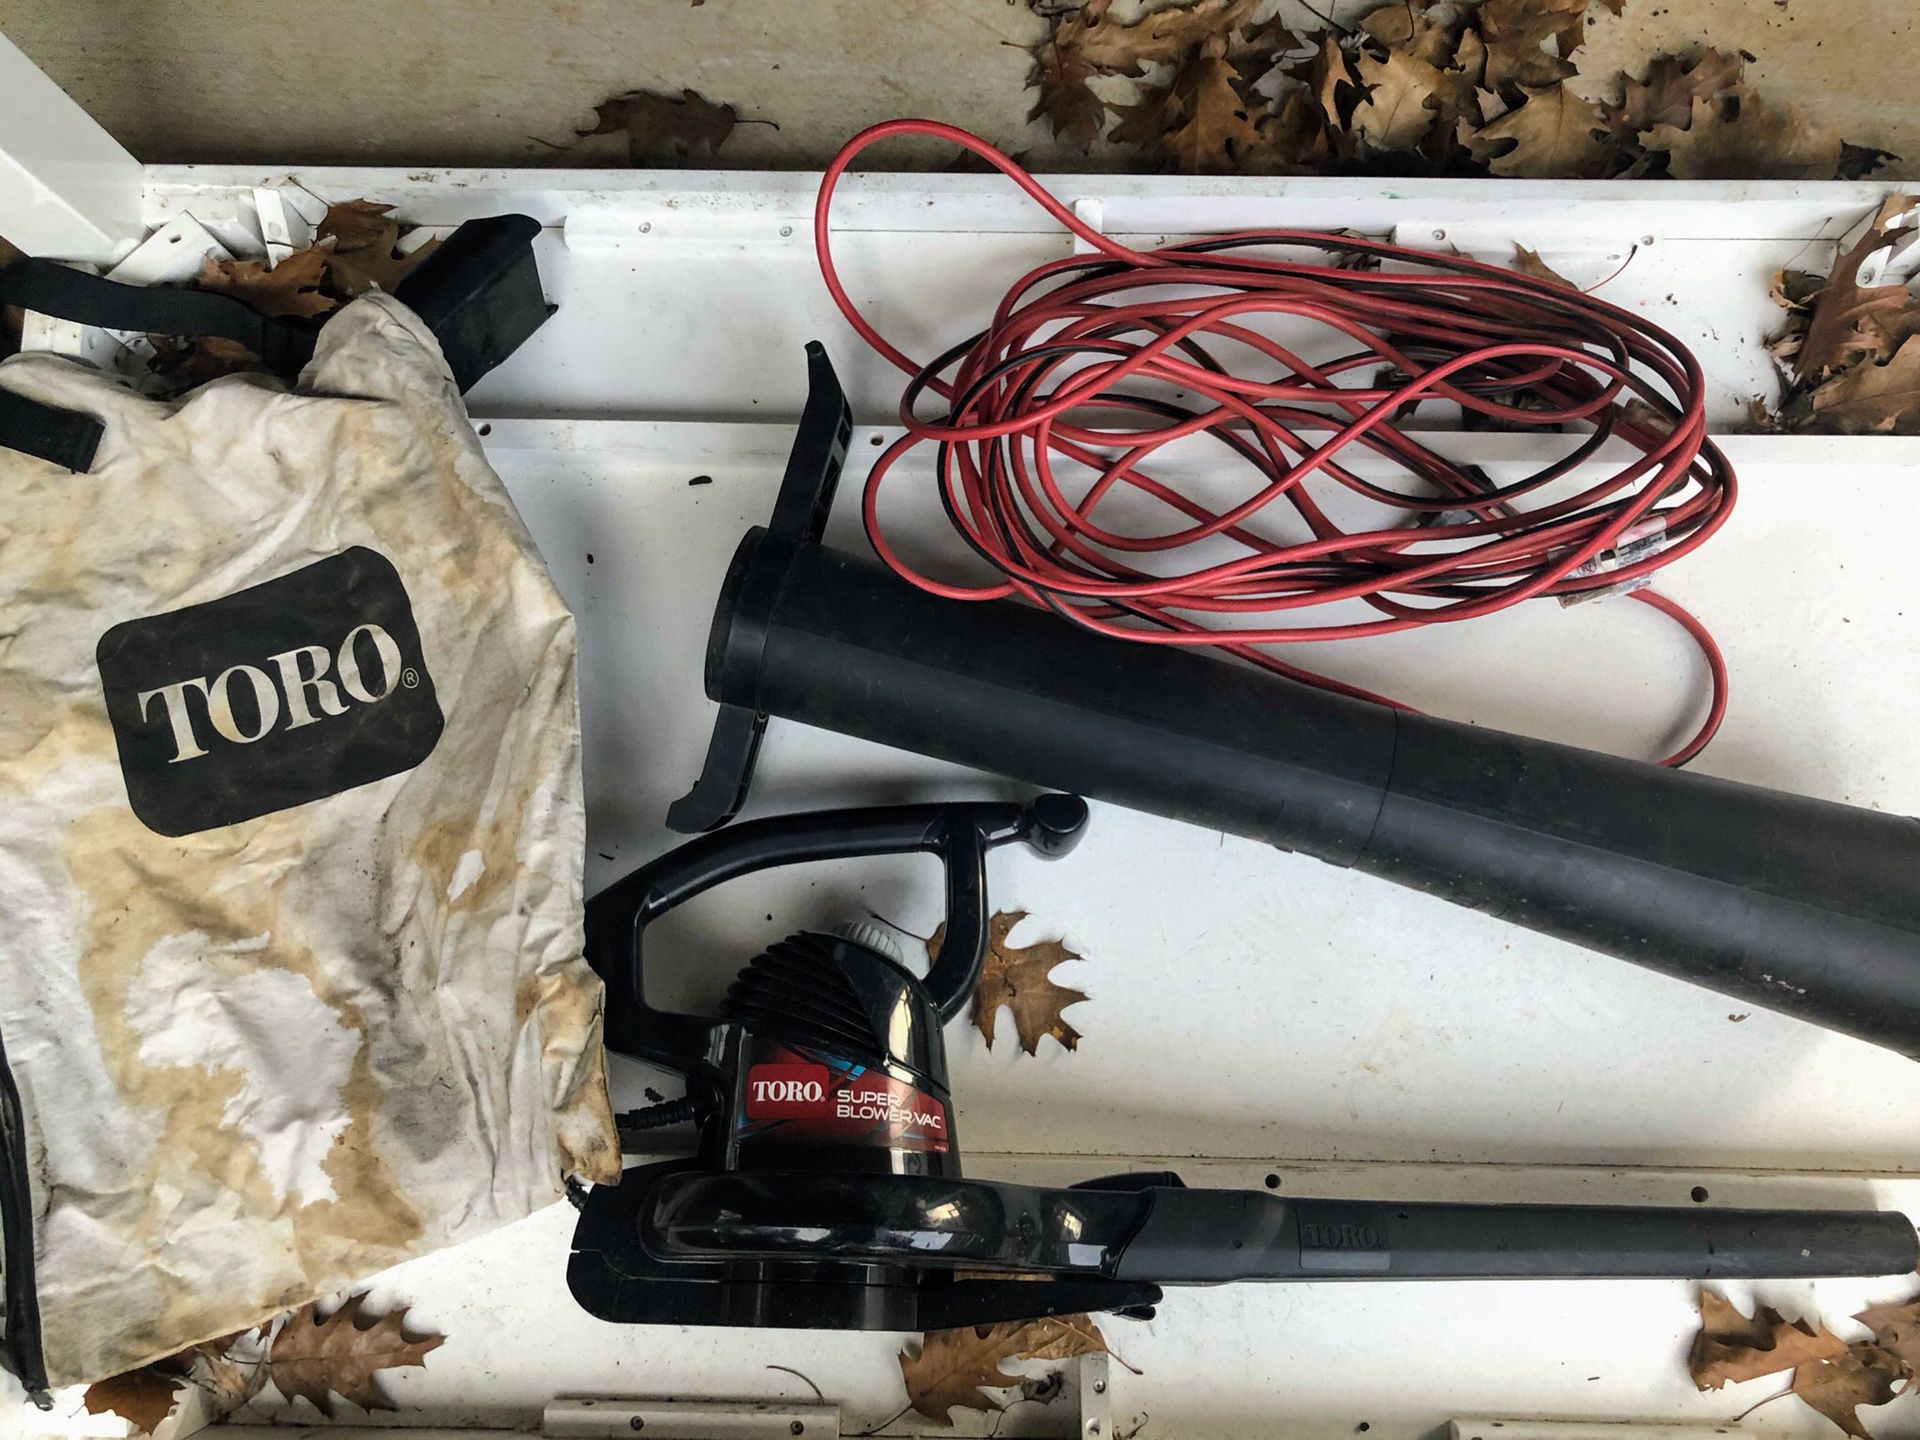 Toro leaf blower with long electric cord